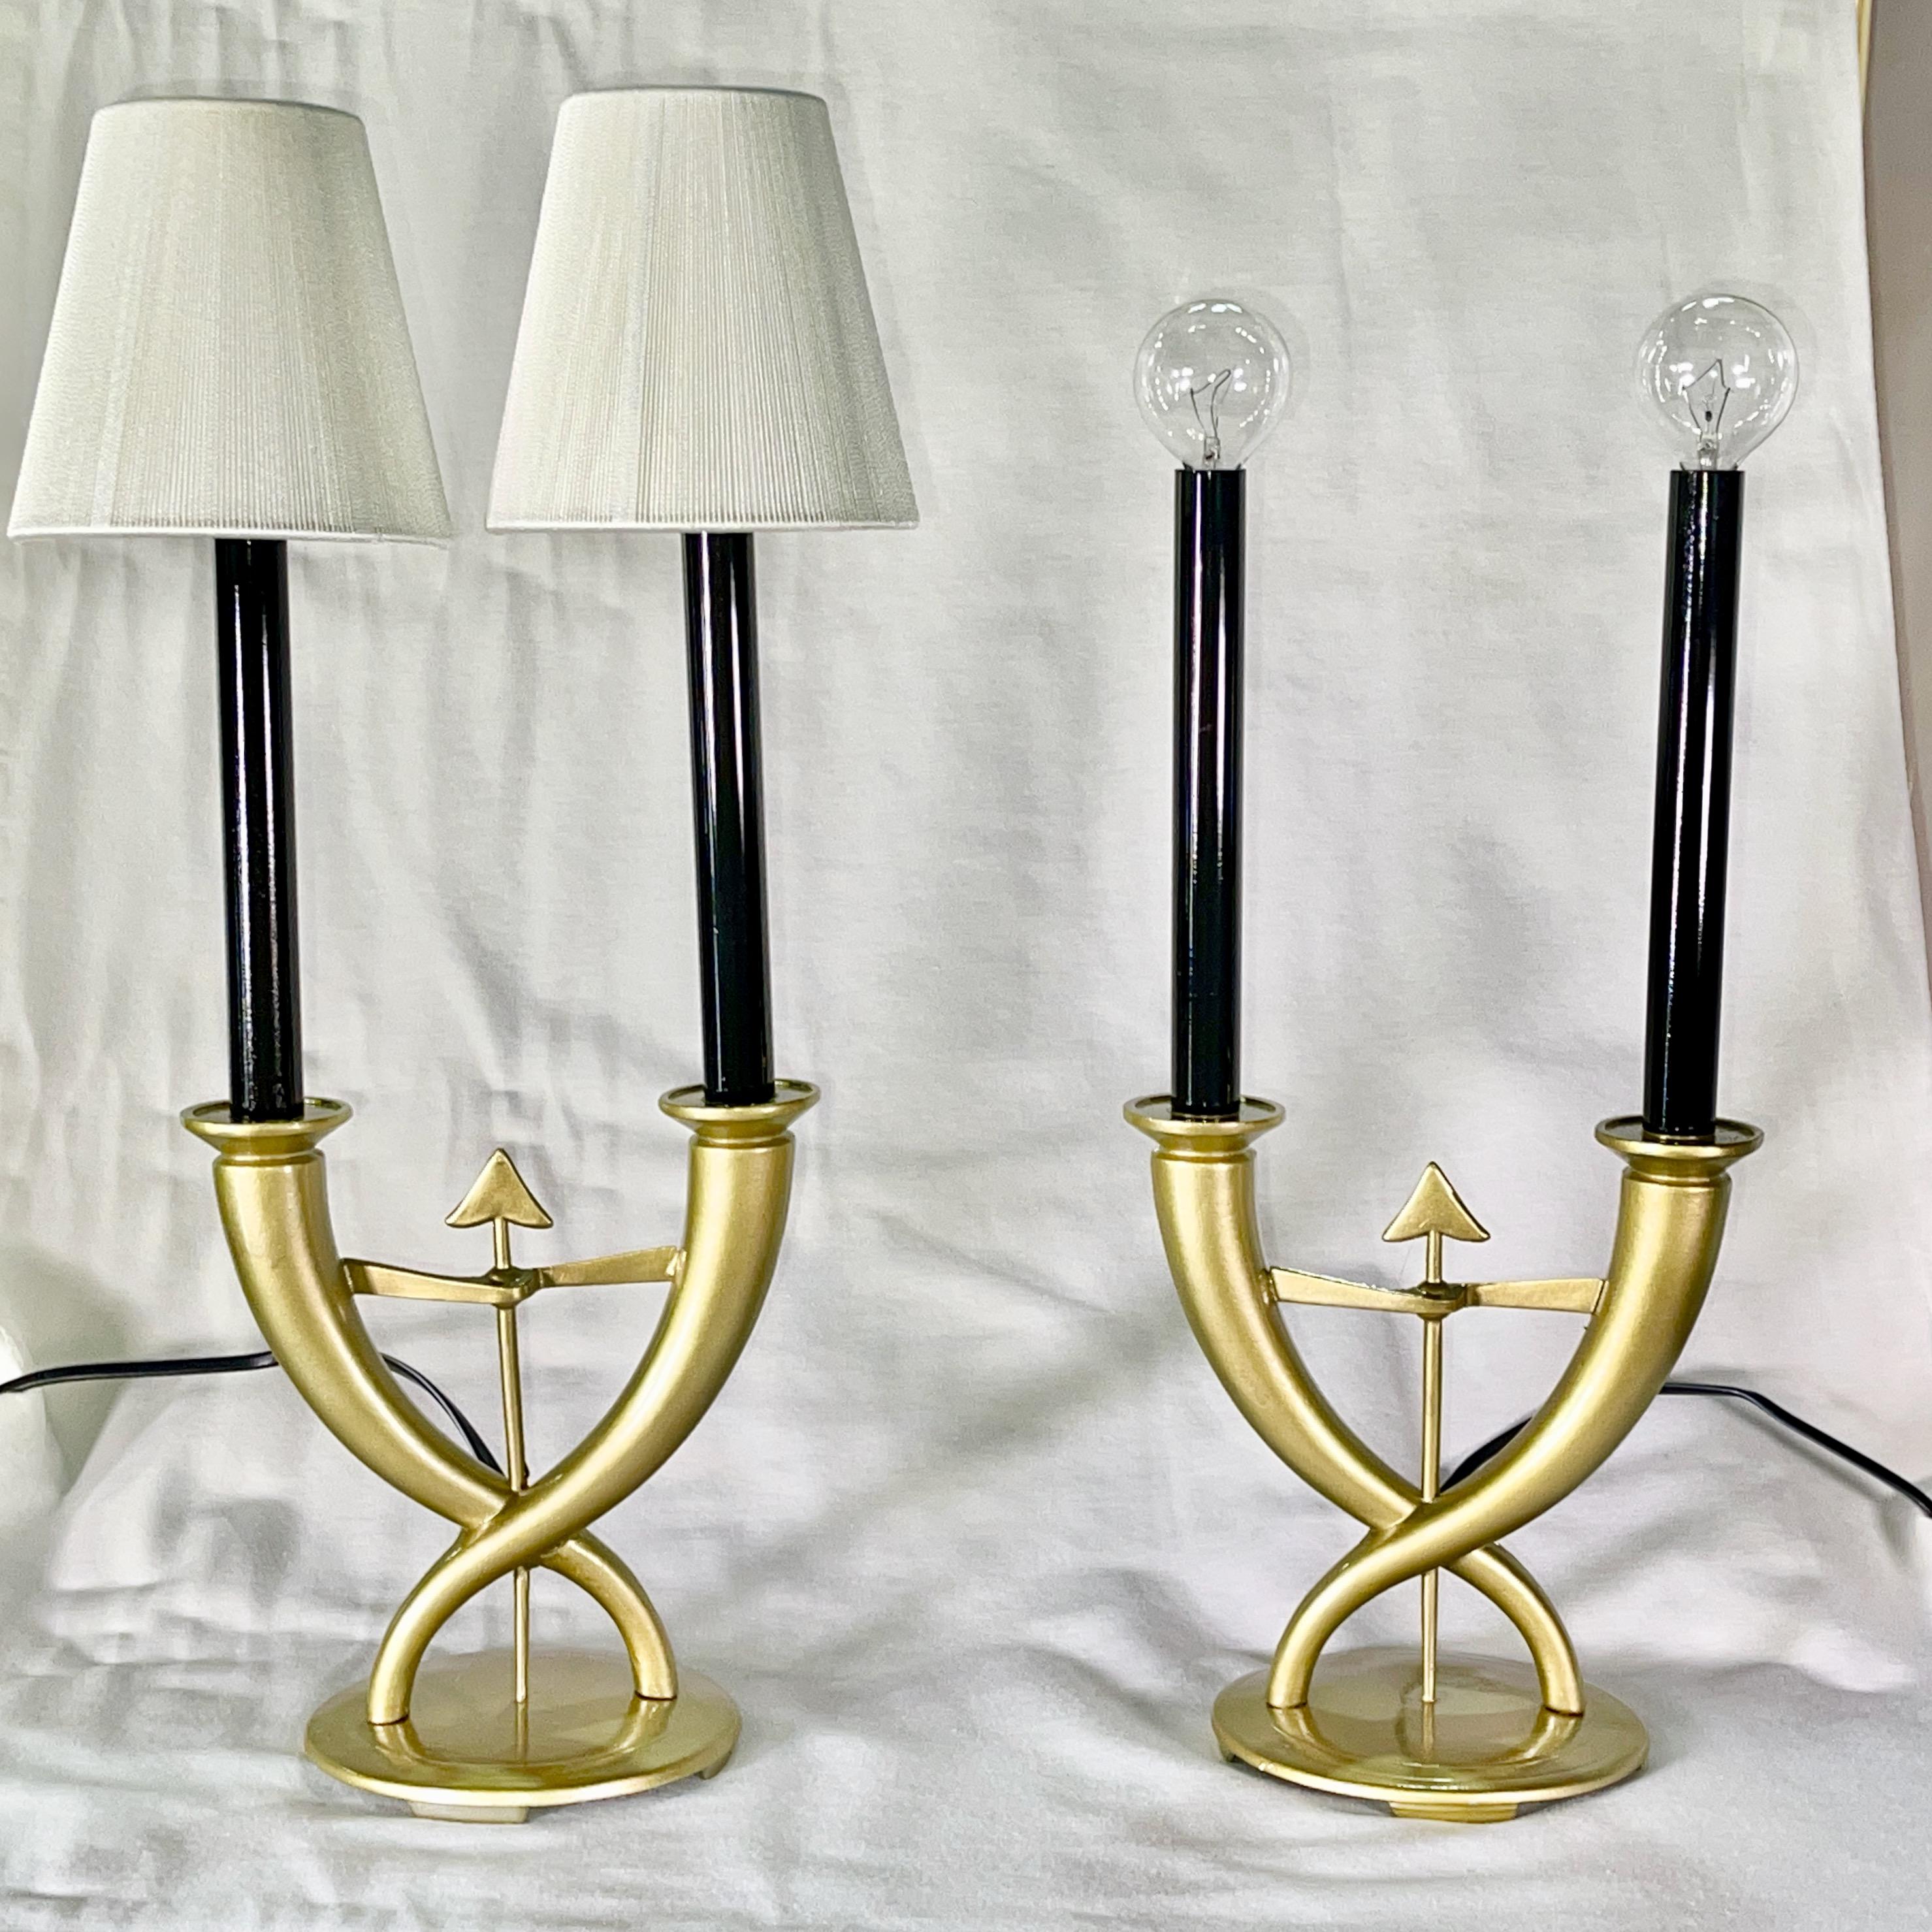 Powder-Coated Pair of Gio Ponti Candelabra Fleche Lamps For Sale